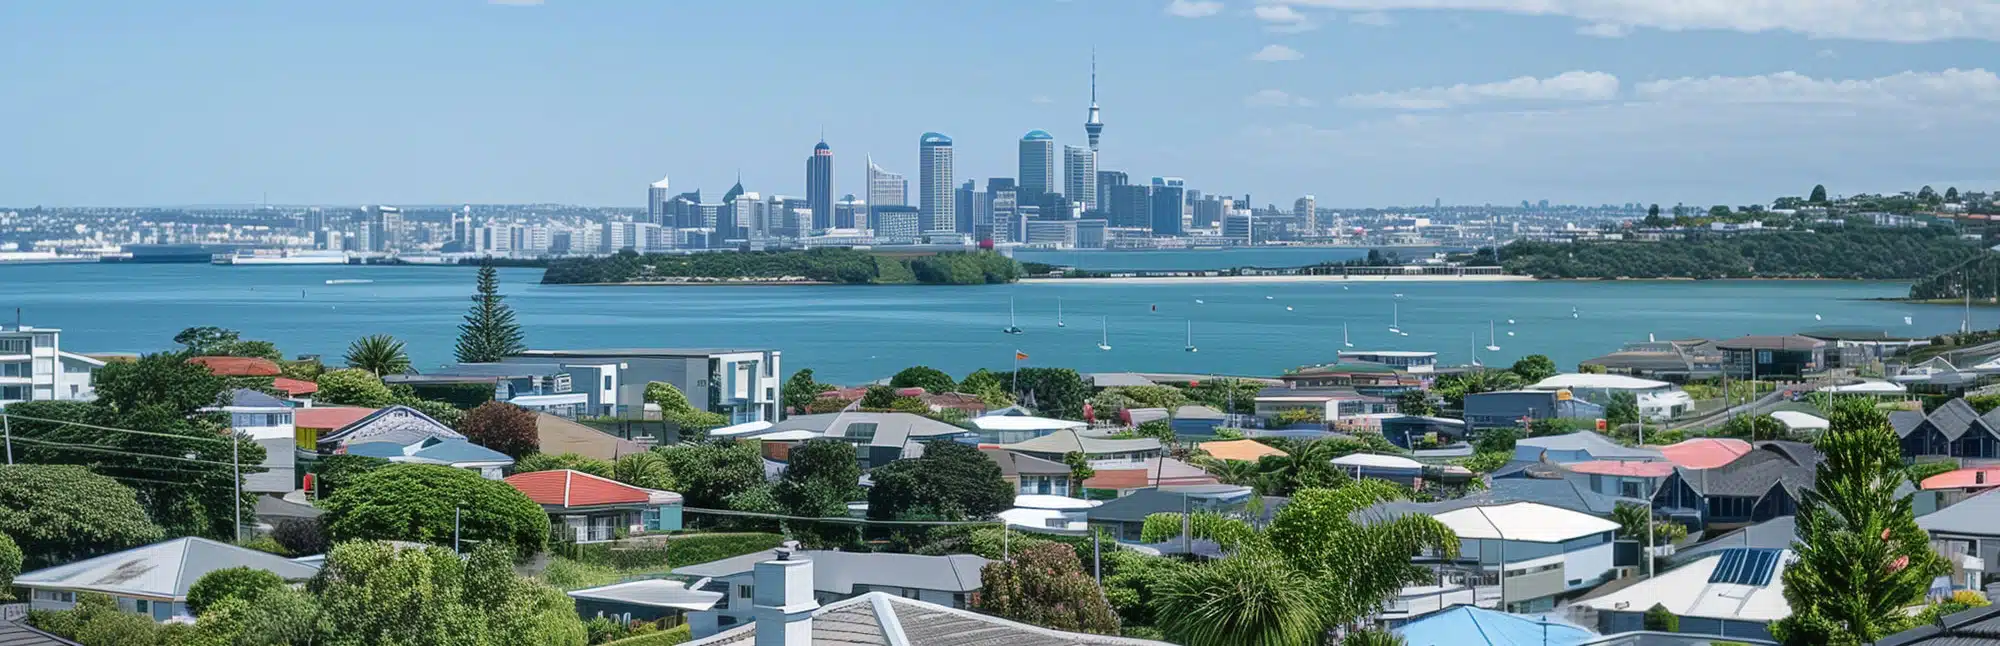 Overlooking a residential area & across the sea, a skyline view of Auckland city centre in the horizon on a sunny day